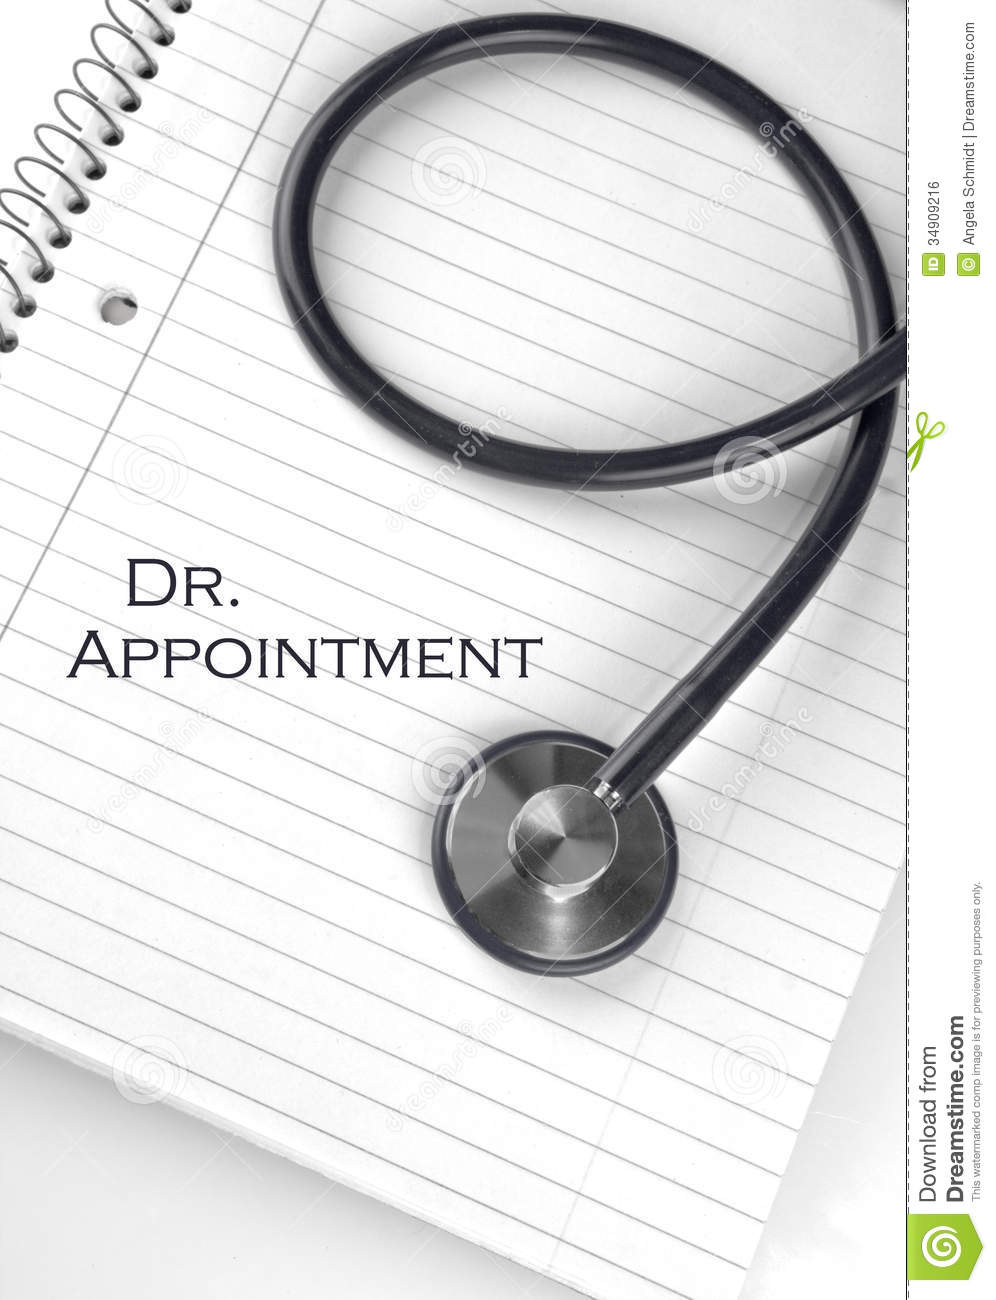 Dr  Appointment Royalty Free Stock Image   Image  34909216